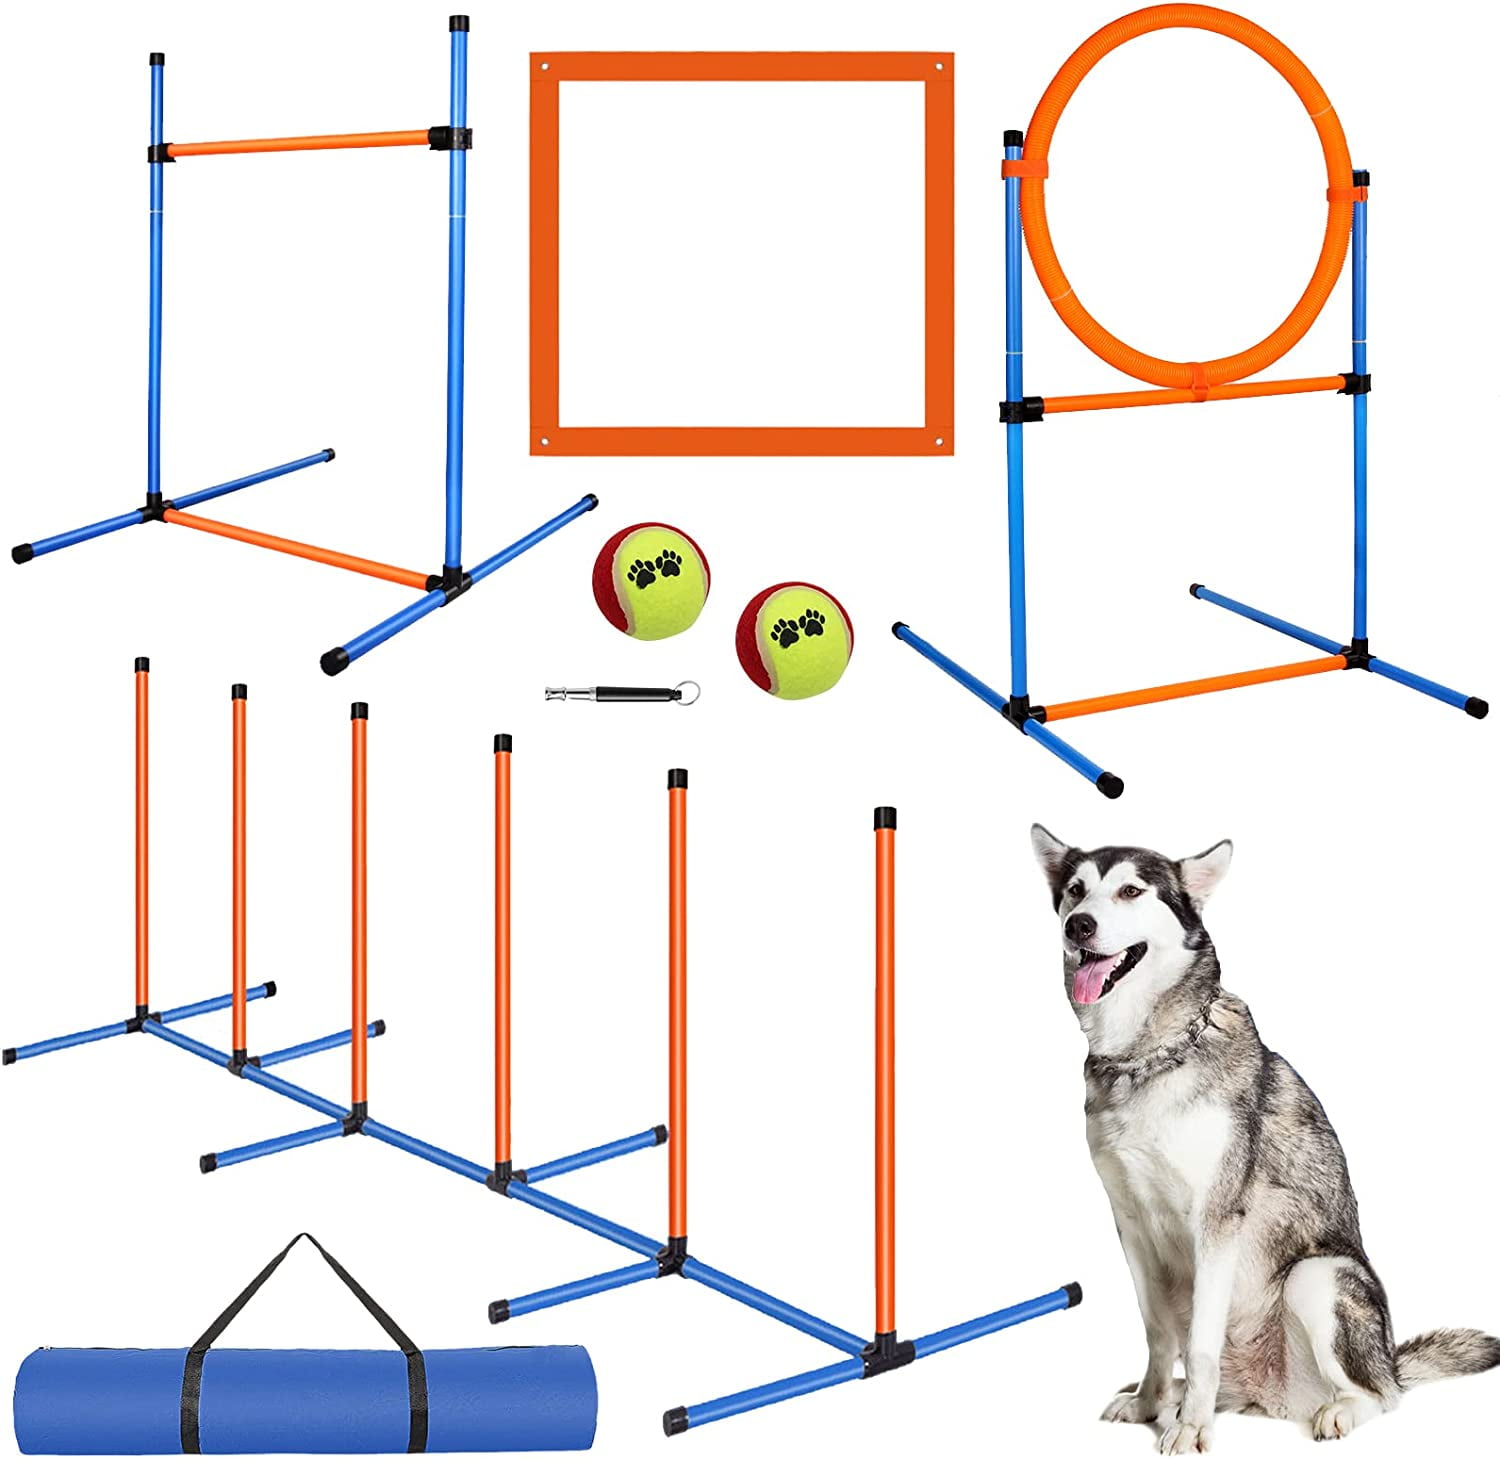 Dog Agility Training Equipment for Dogs Obstacle Course Backyard with 10 Feet Dog Agility Tunnel 2 Sandbags Weave Poles Jump Hoop Pause Stop Box Dog Agility Course Kit for Exercise Outdoors 